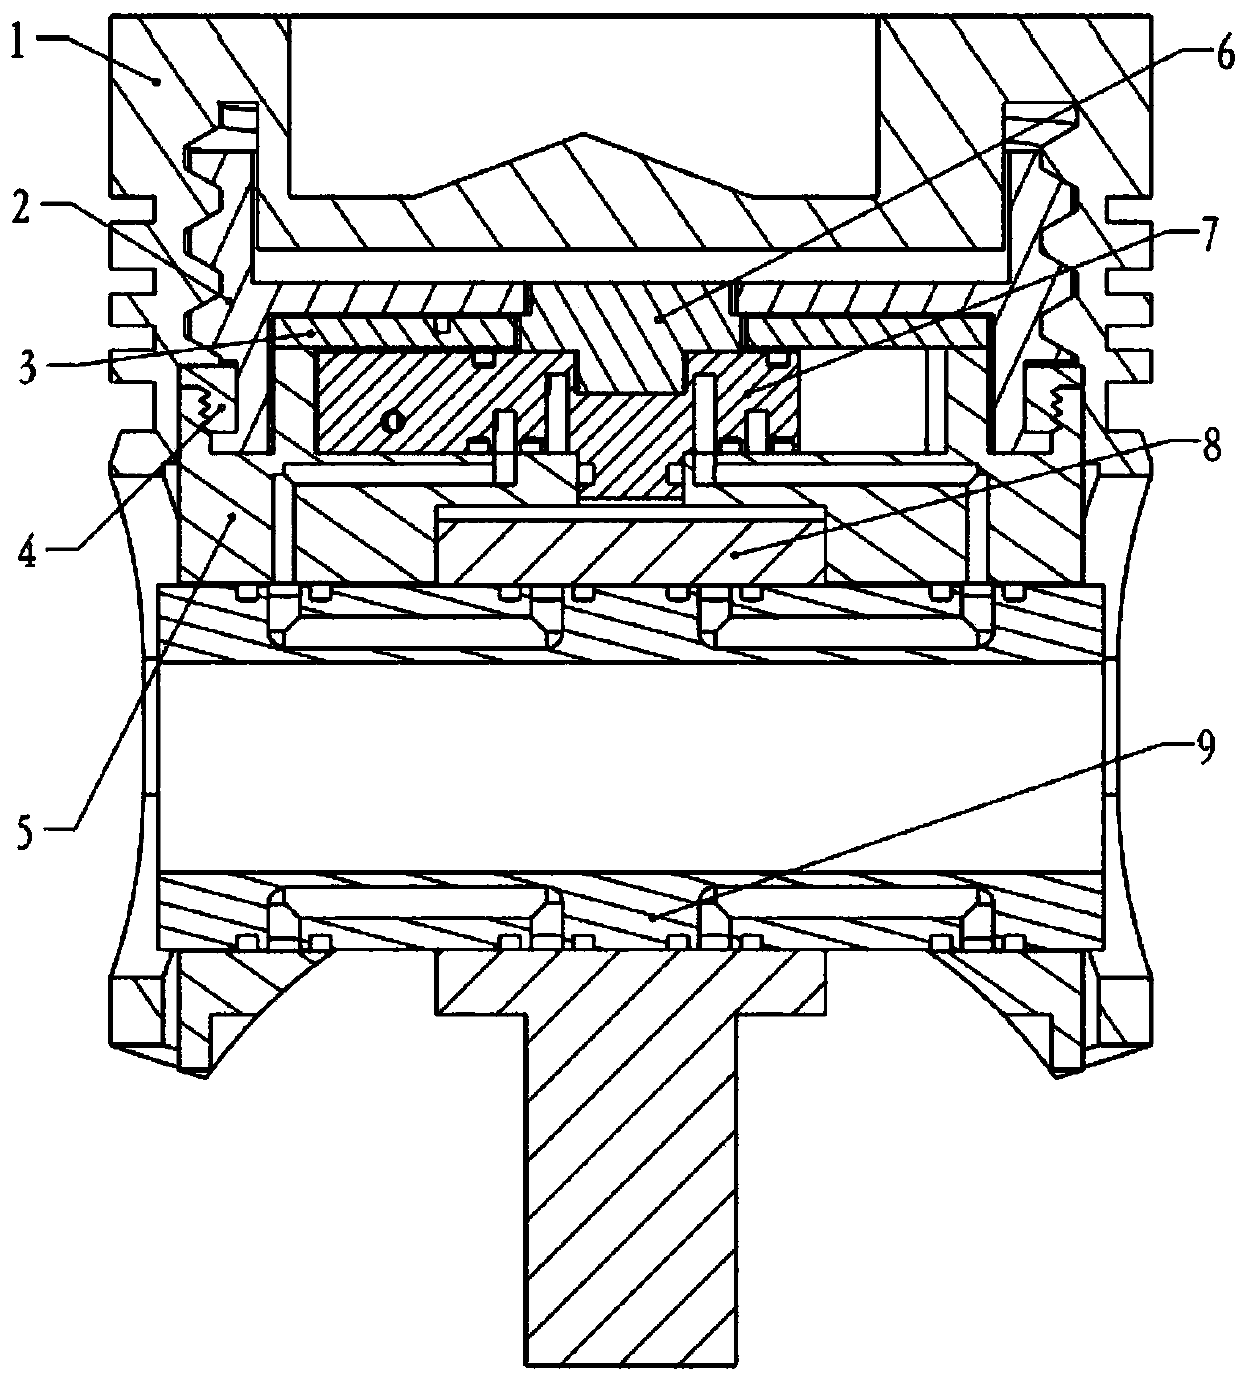 Variable compression ratio piston with limiting ring structure